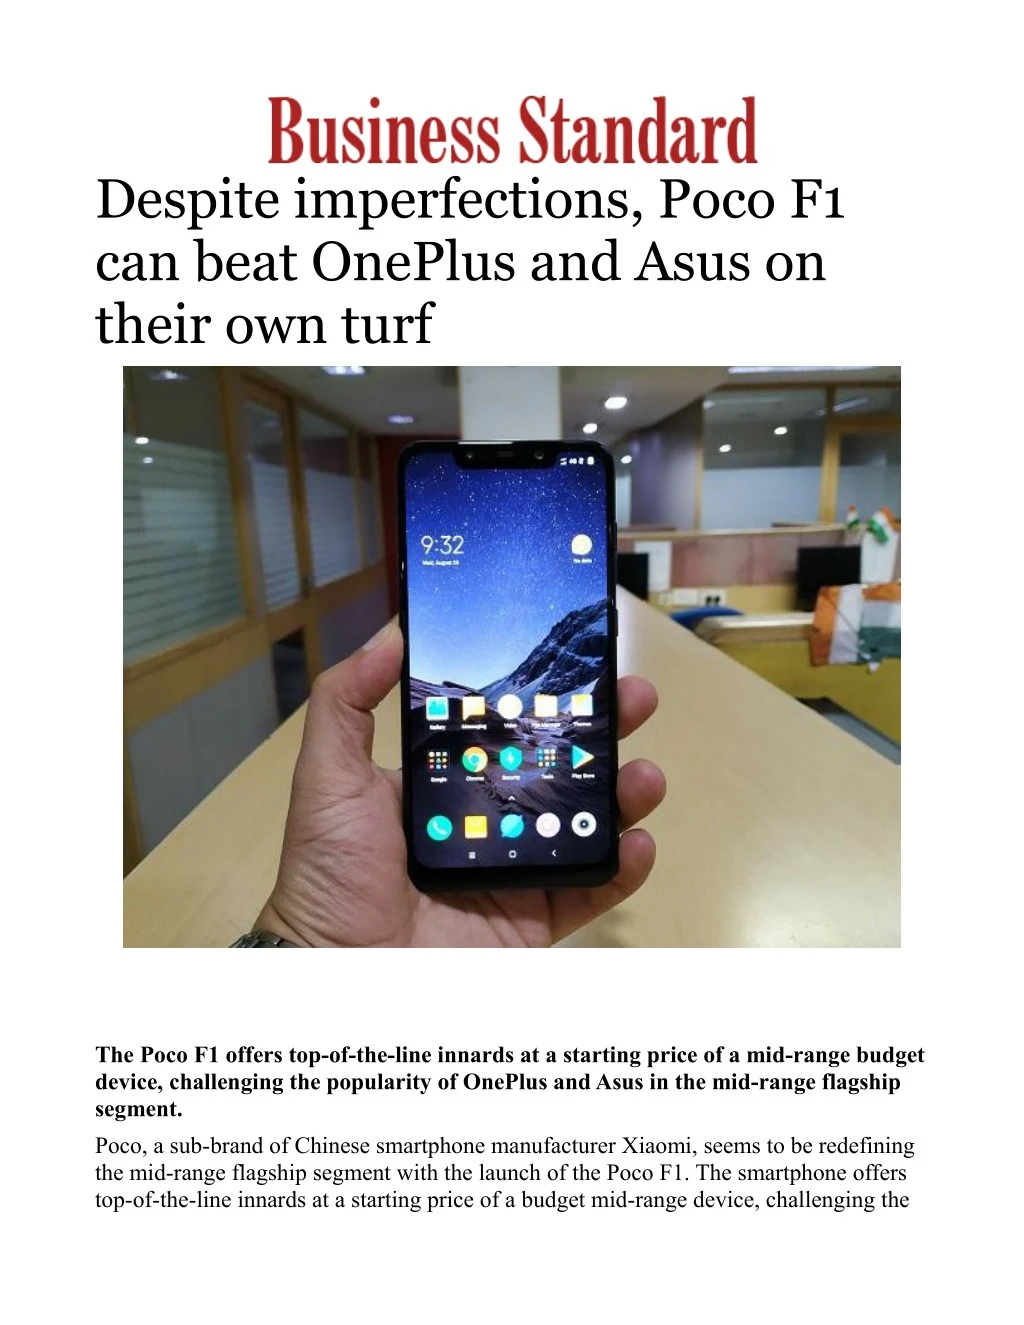 despite imperfections poco f1 can beat oneplus